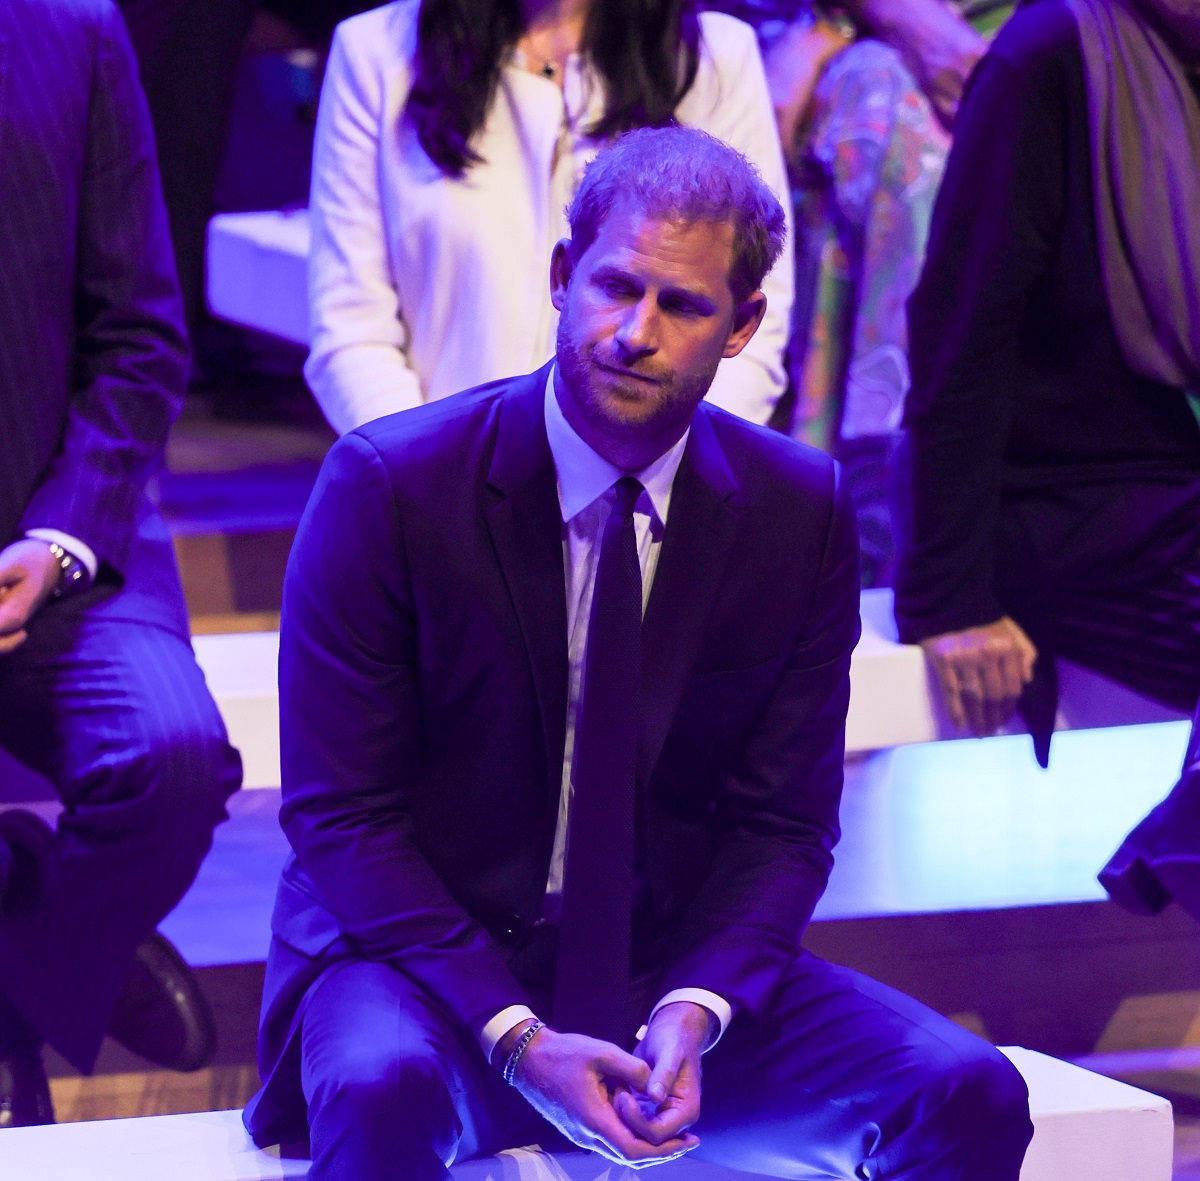 Prince Harry watching as Meghan Markle makes the keynote speech during the Opening Ceremony of the One Young World Summit 2022